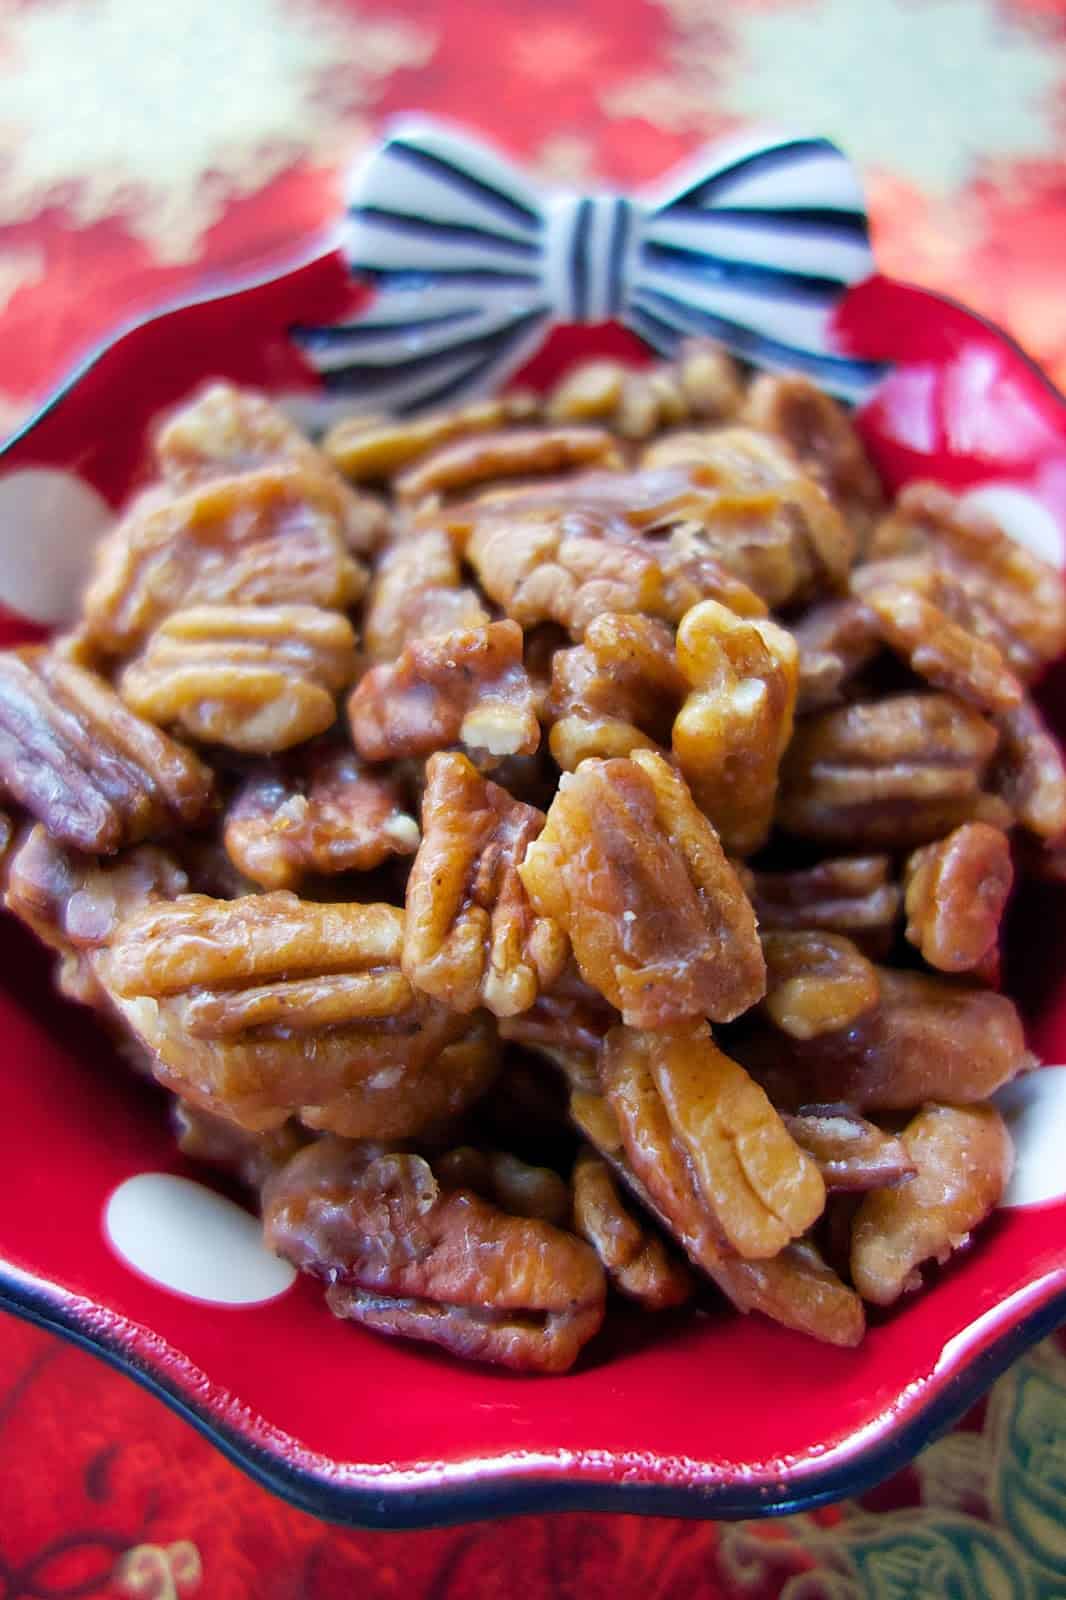 Peppered Glazed Pecans - you'll want to double the recipe - they go fast! Pecans coated in brown sugar, butter, corn syrup, pepper and salt. Great for snacking on at holiday parties! Also makes a great homemade gift! Everyone LOVES this easy snack recipe!